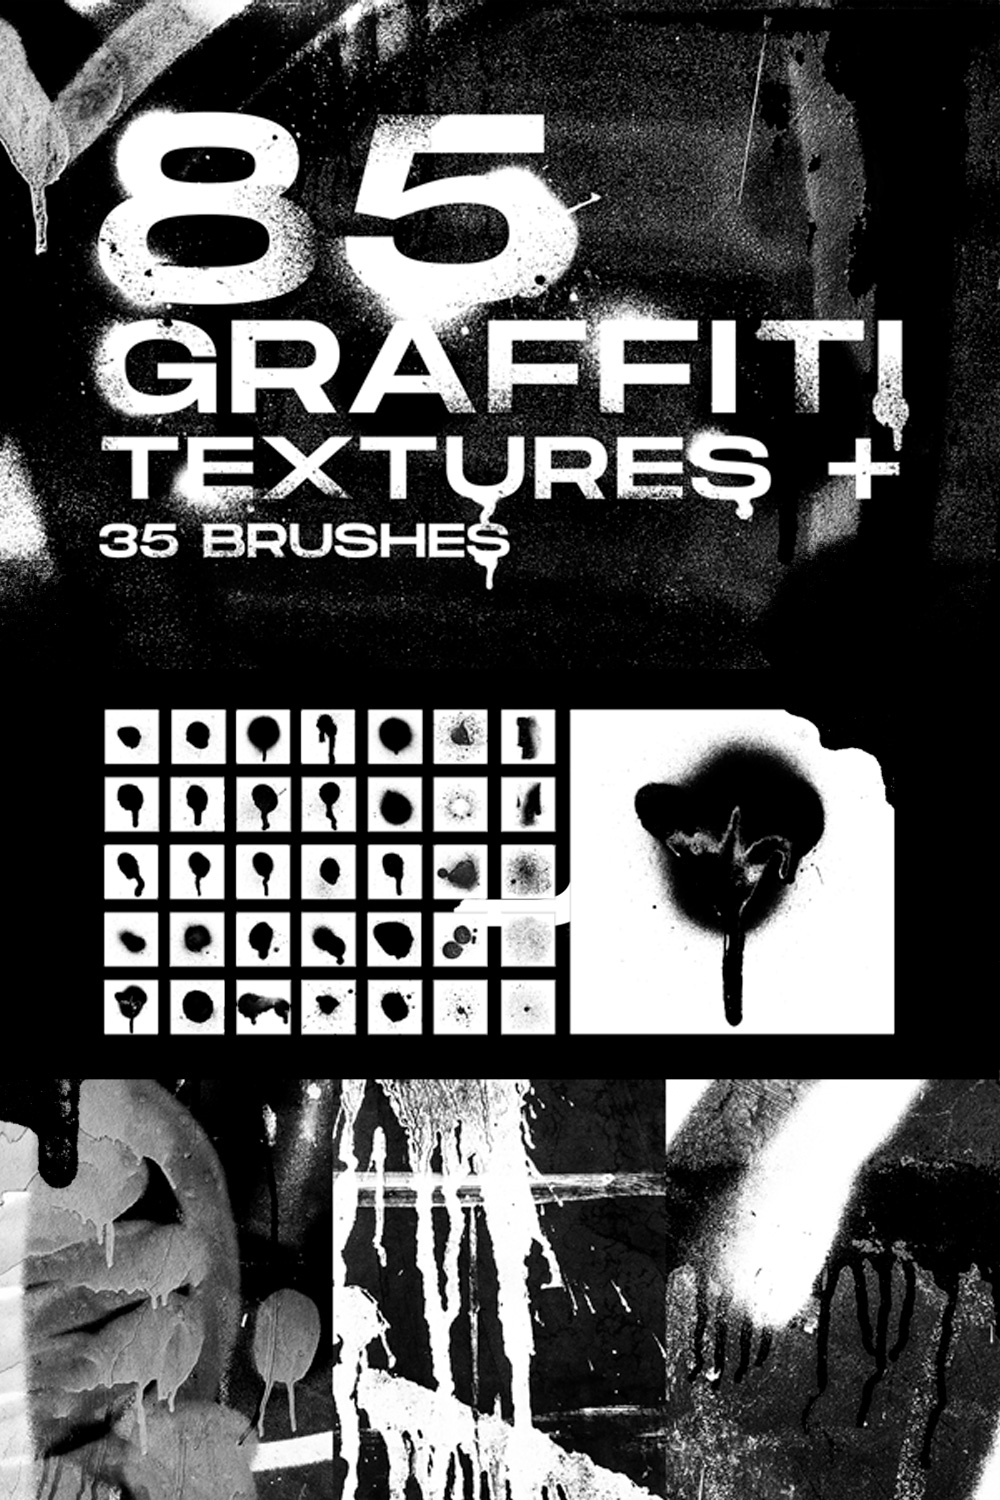 Graffiti Texture and Brushes for Procreate Pinterest image.